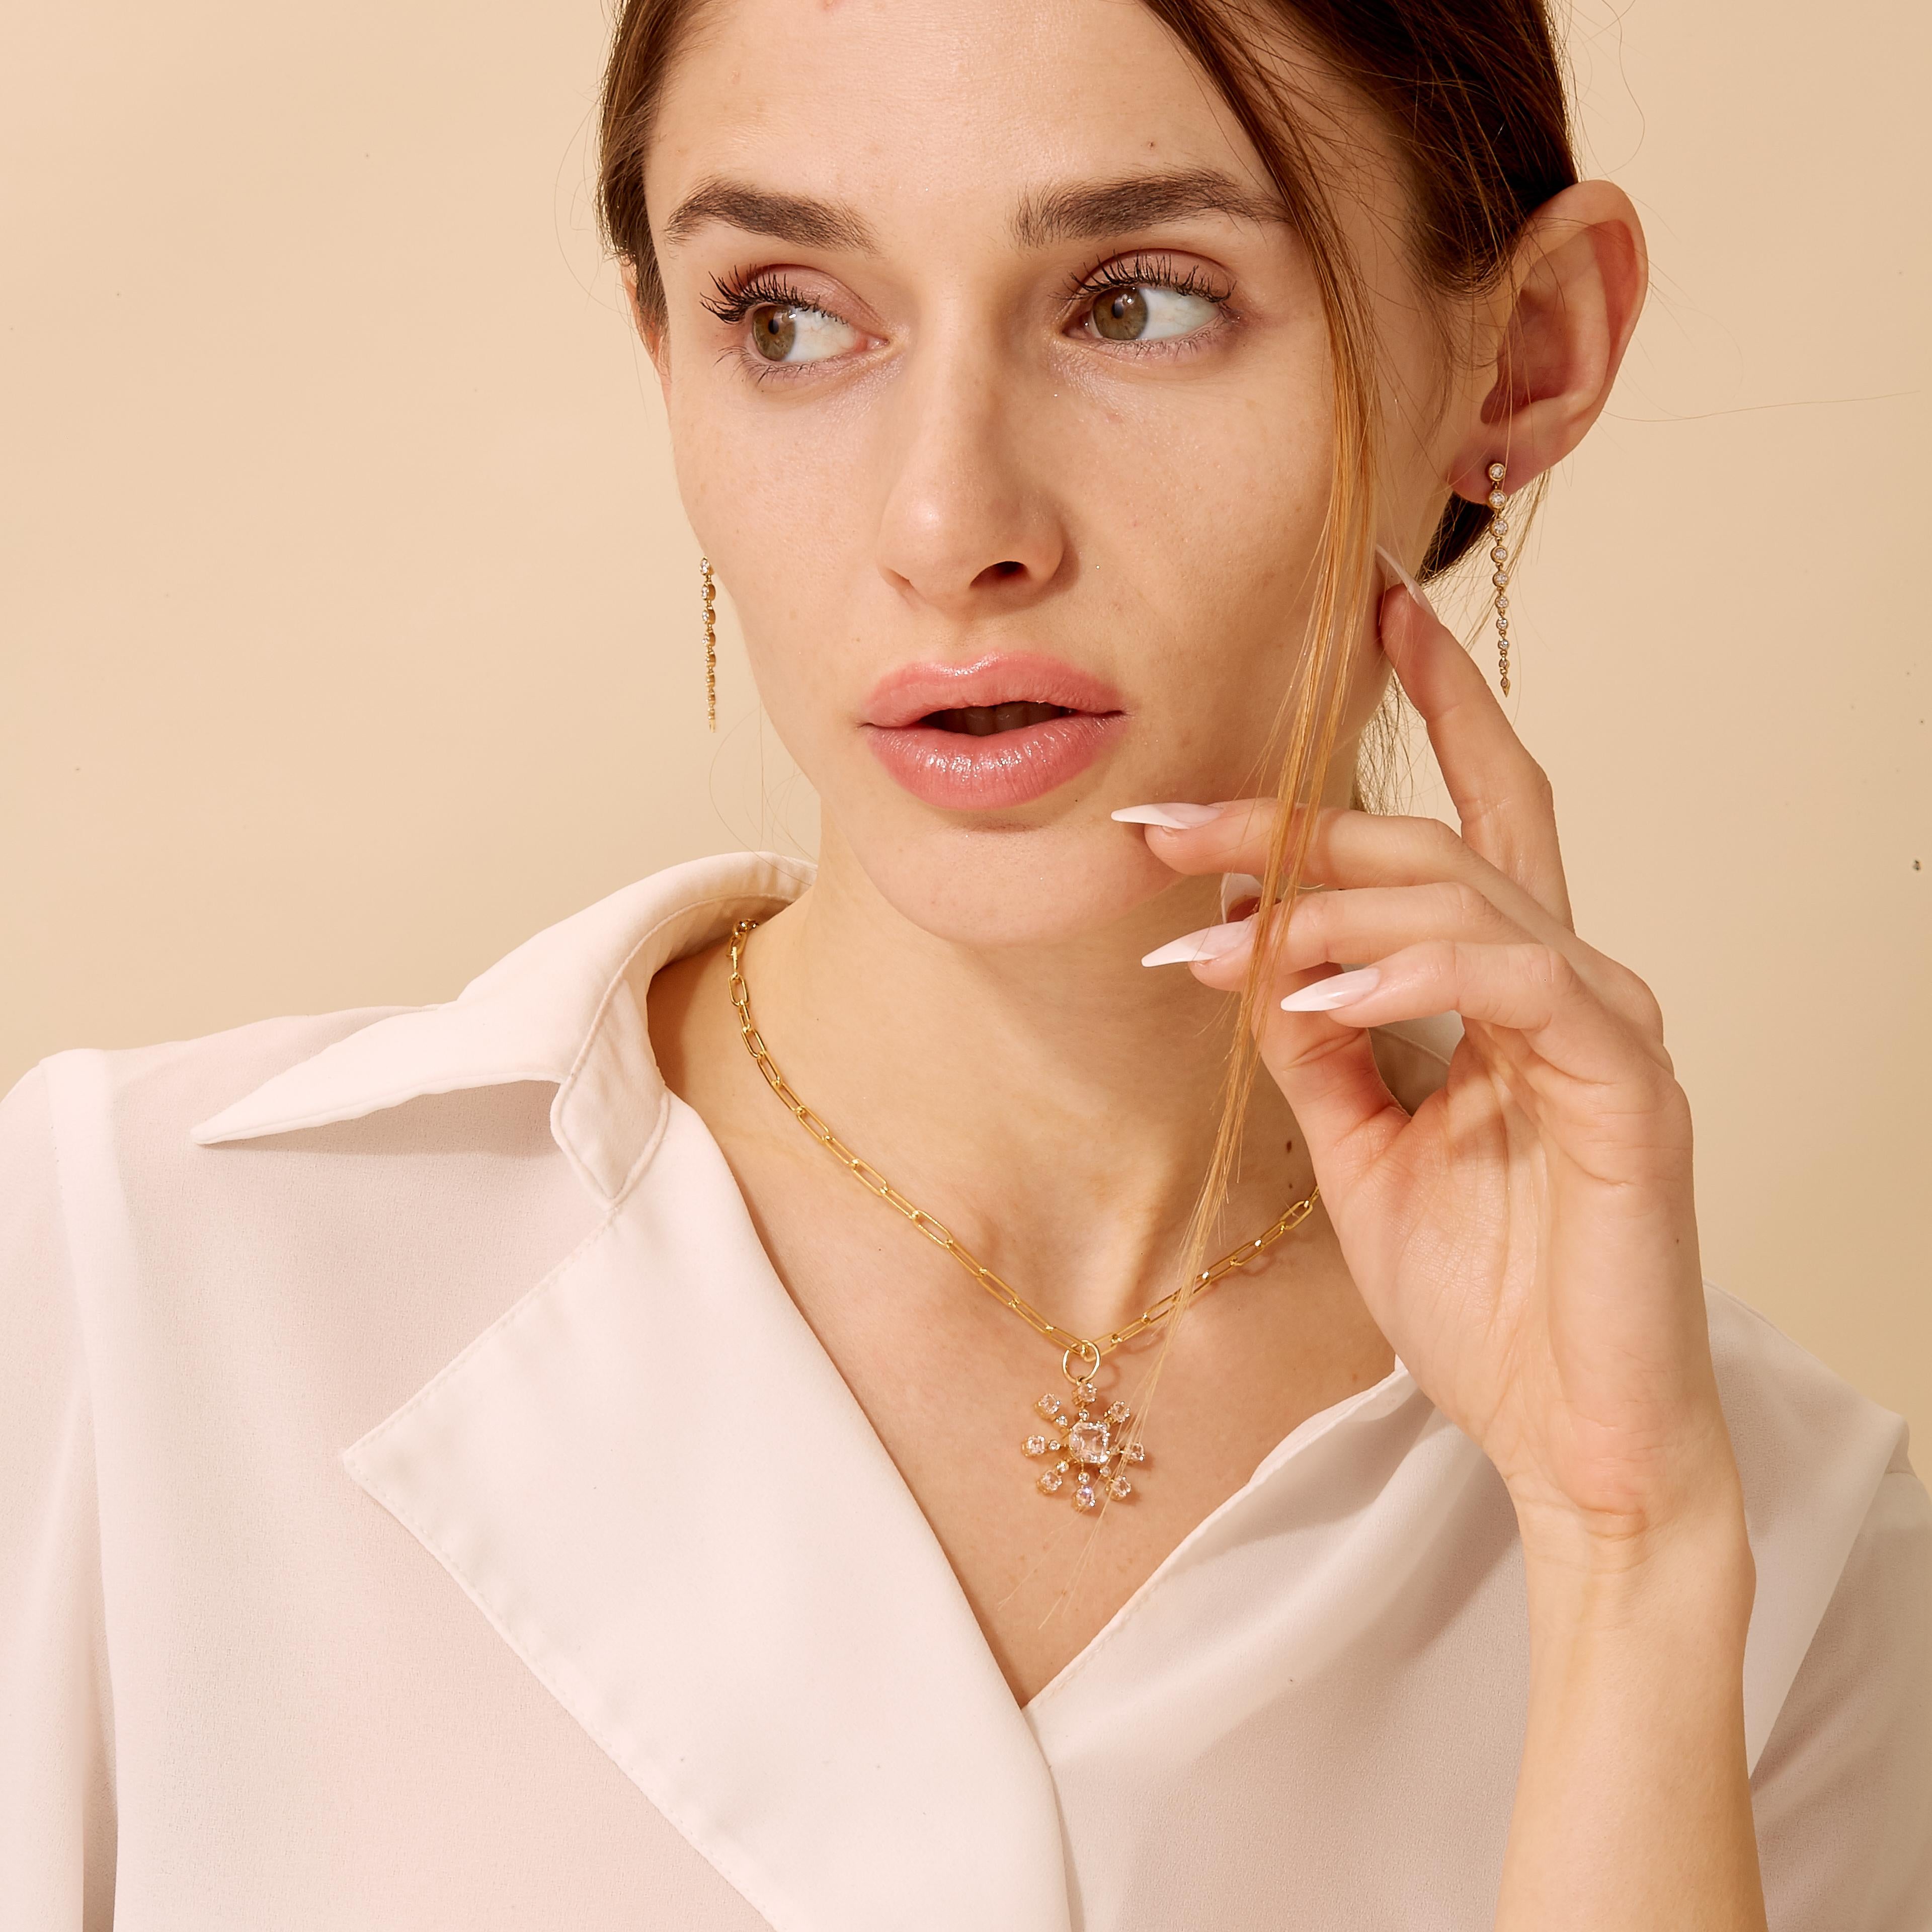 Created in 18 karat yellow gold
Rock crystal 2.20 carats approx.
Diamonds 0.10 carat approx.
Limited edition
Chain sold separately

Exquisitely crafted in 18 karat yellow gold, featuring a rock crystal of approximately 2.20 carats and an array of